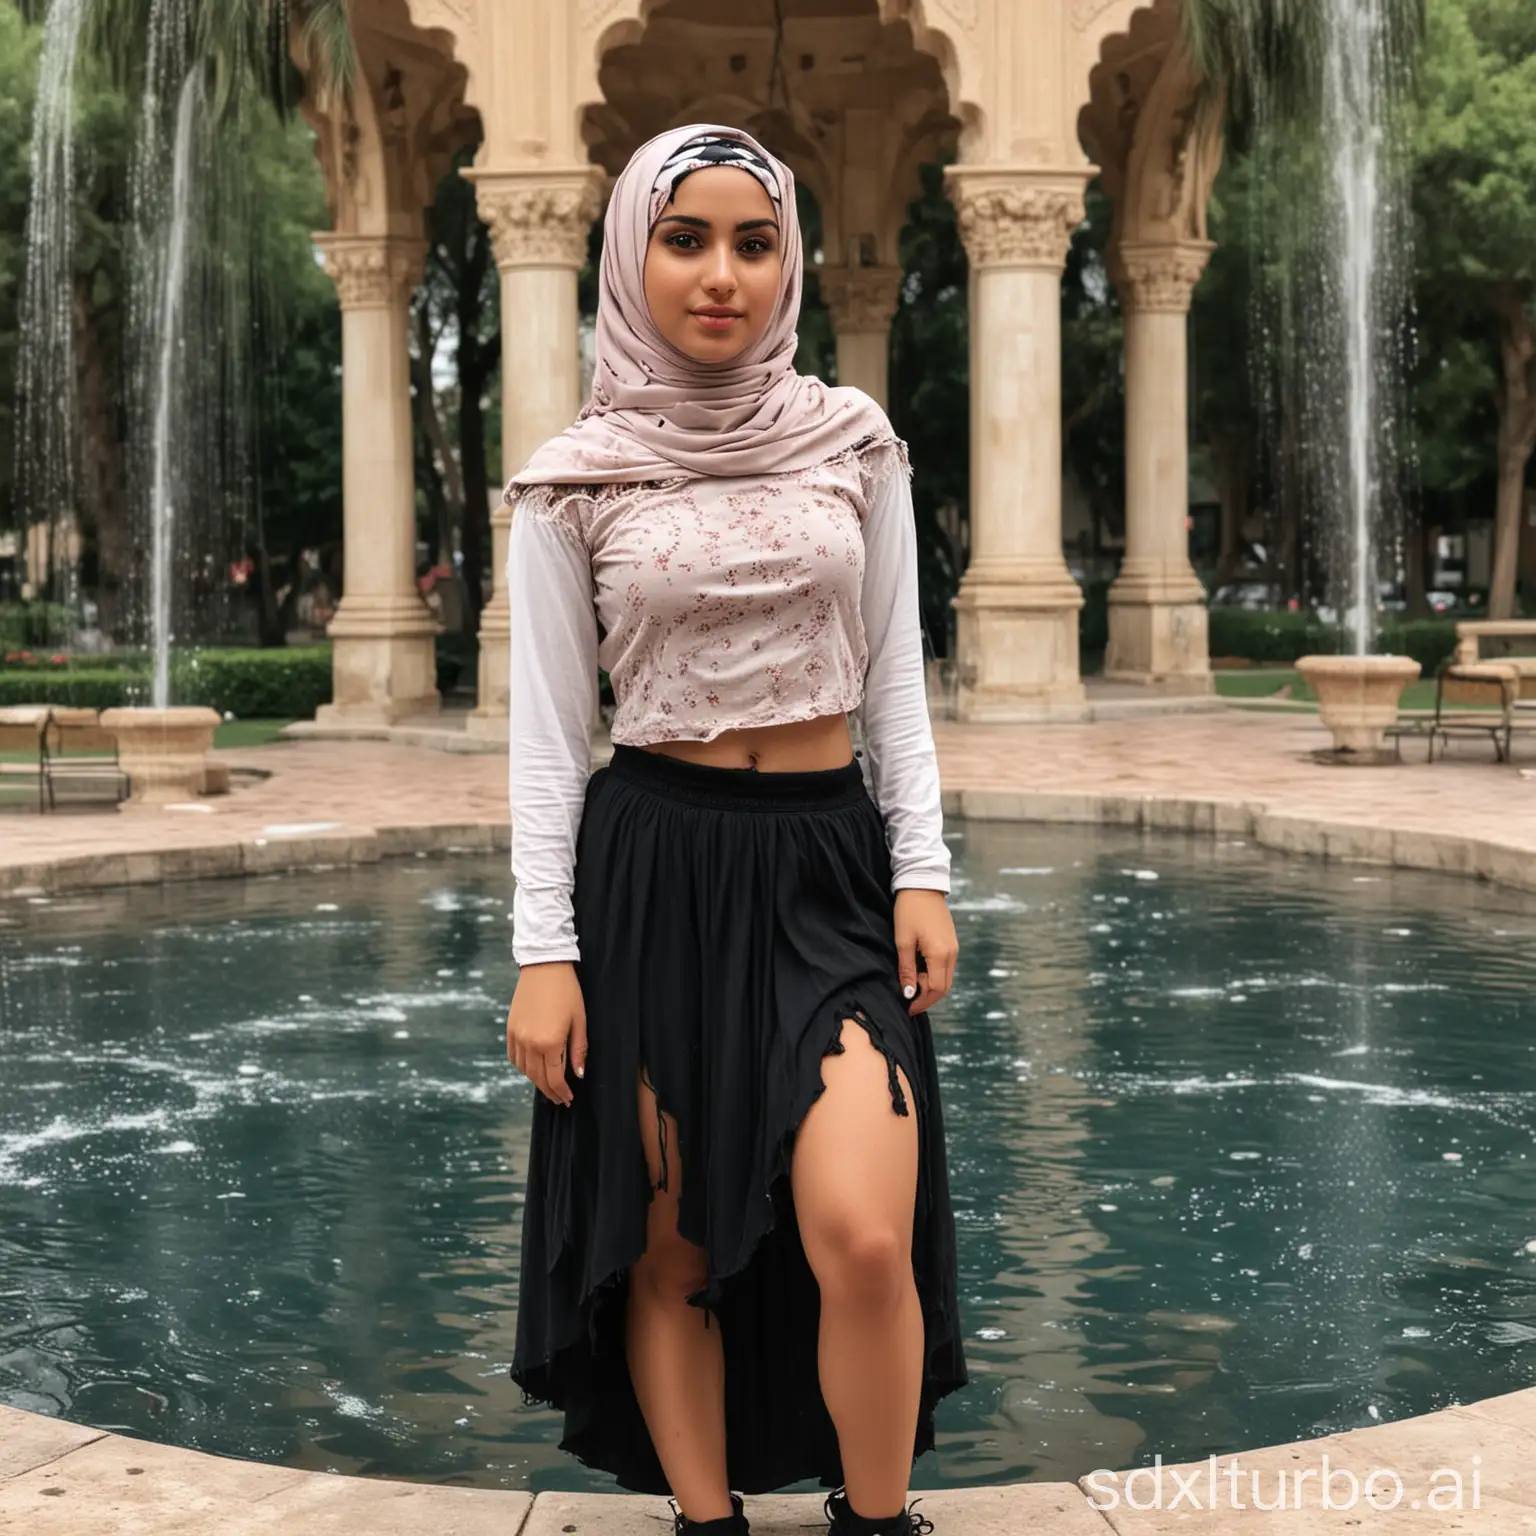 hijabi girl wearing ripped crop top and black skirt in front of fountain